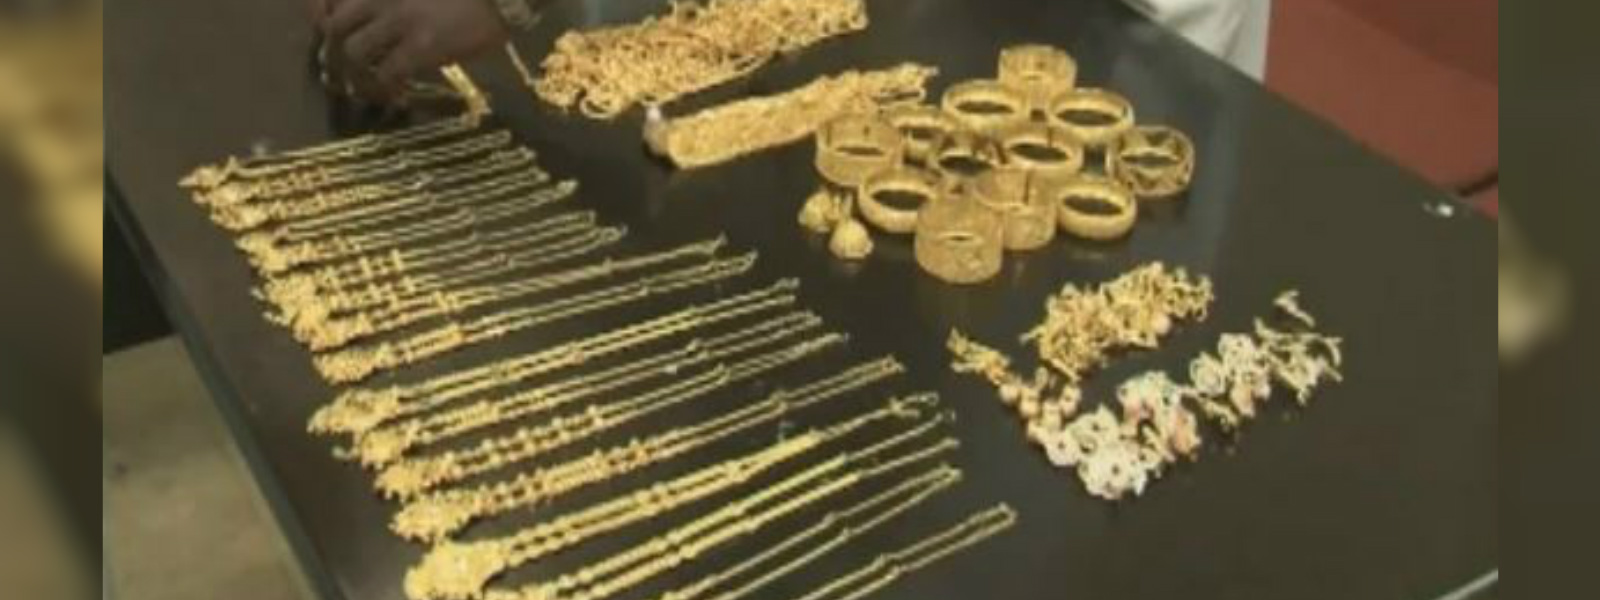 Gold jewellery worth over Rs. 43 Mn seized at BIA